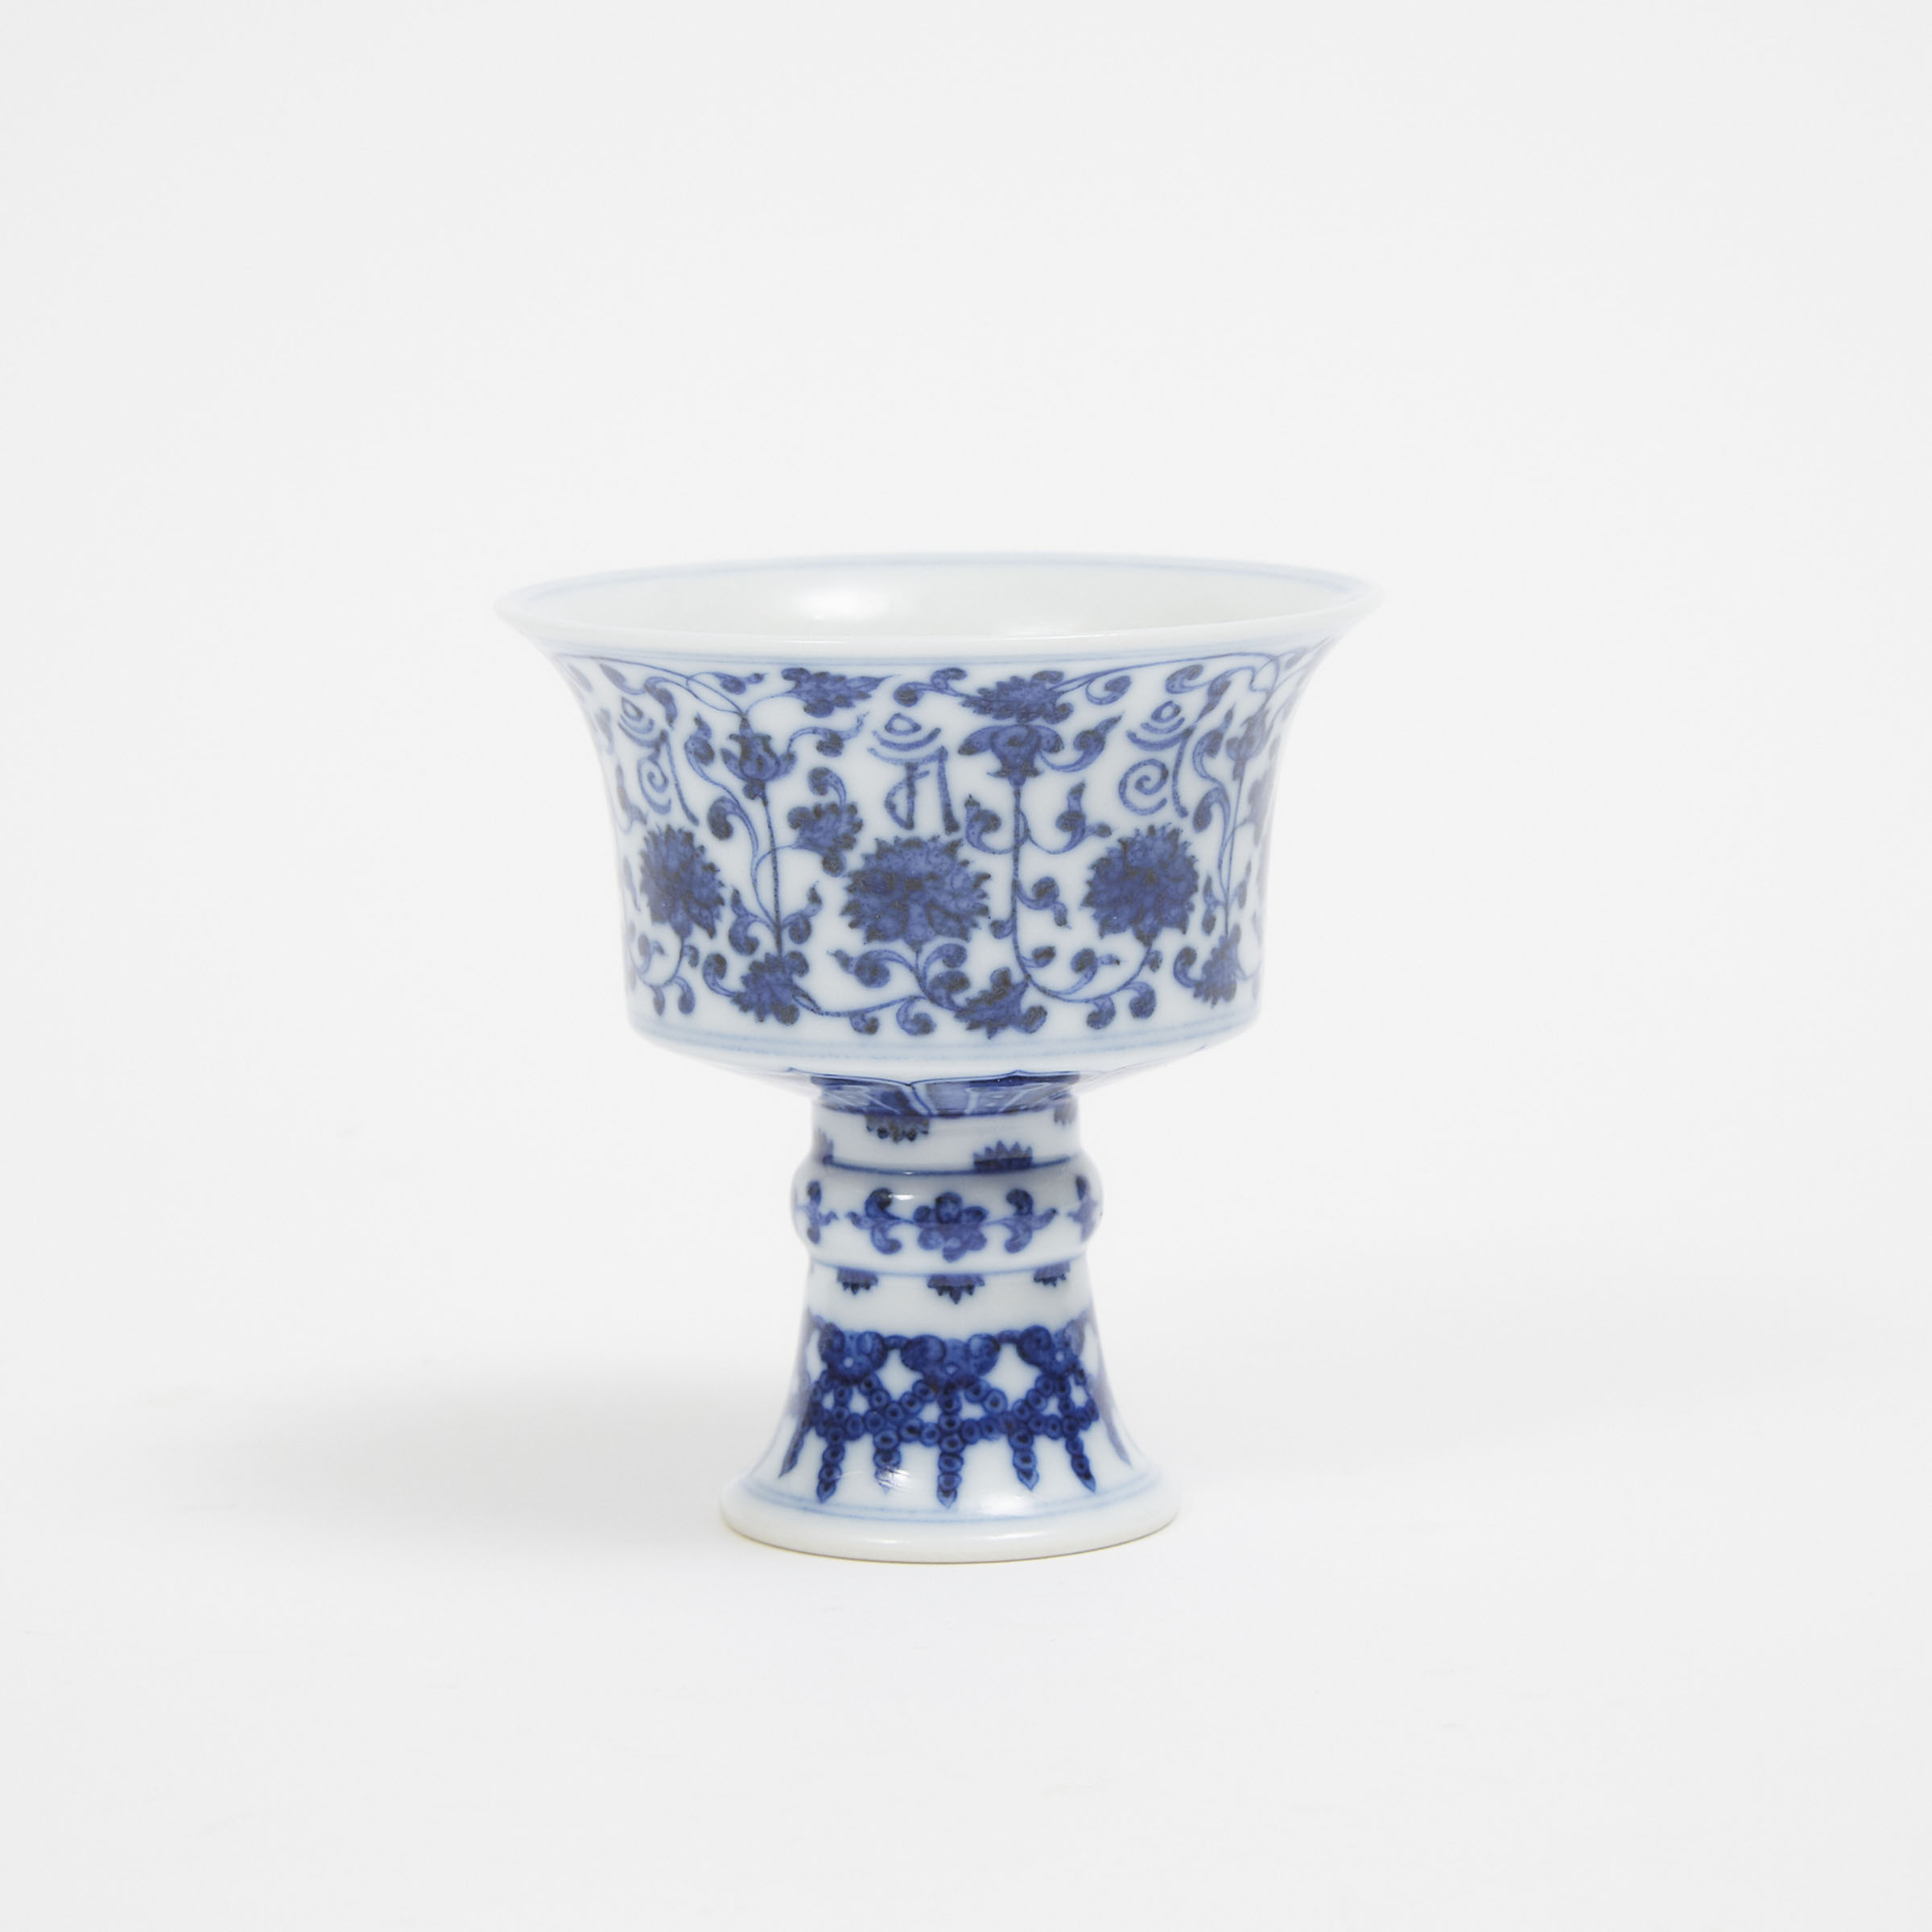 A Blue and White Stem Cup with 'Lanca' Characters, Qianlong Mark